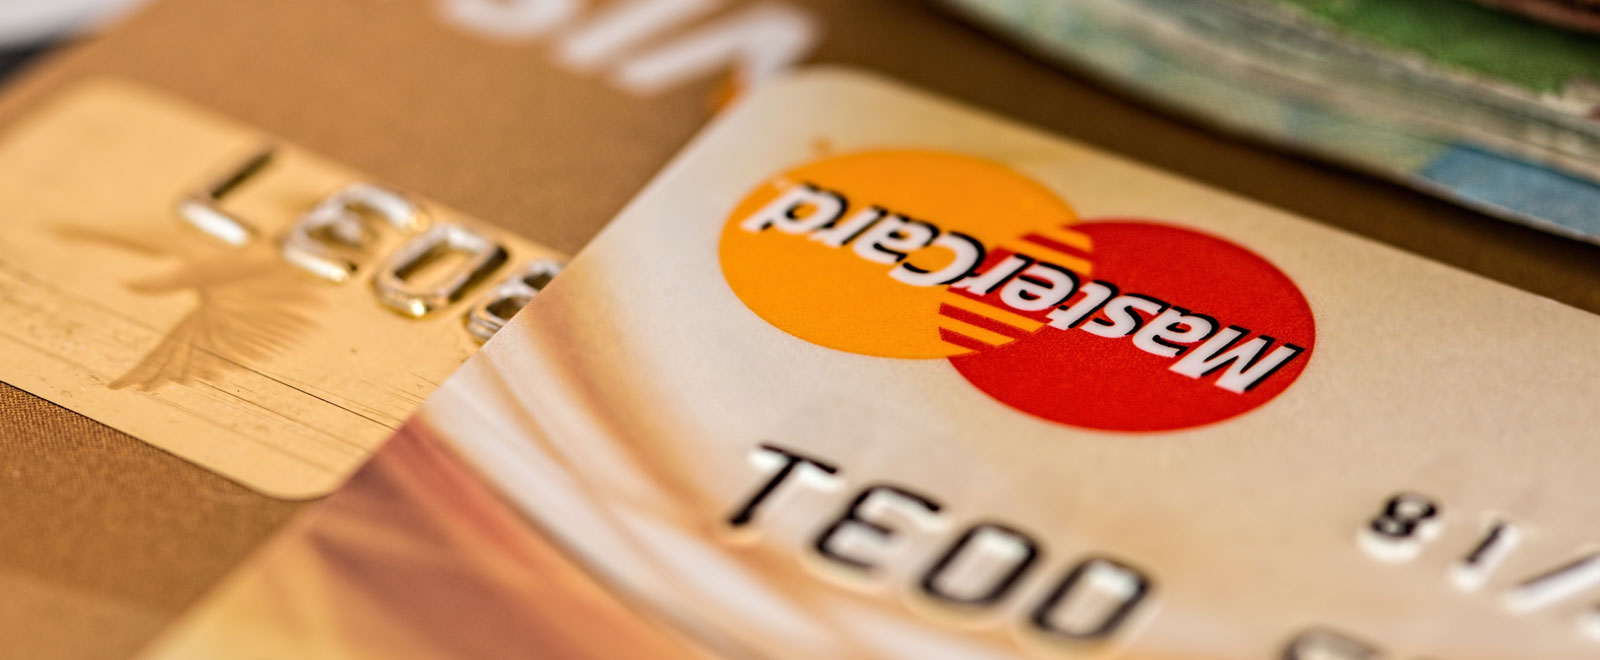 A close up of a Mastercard logo on a credit card.